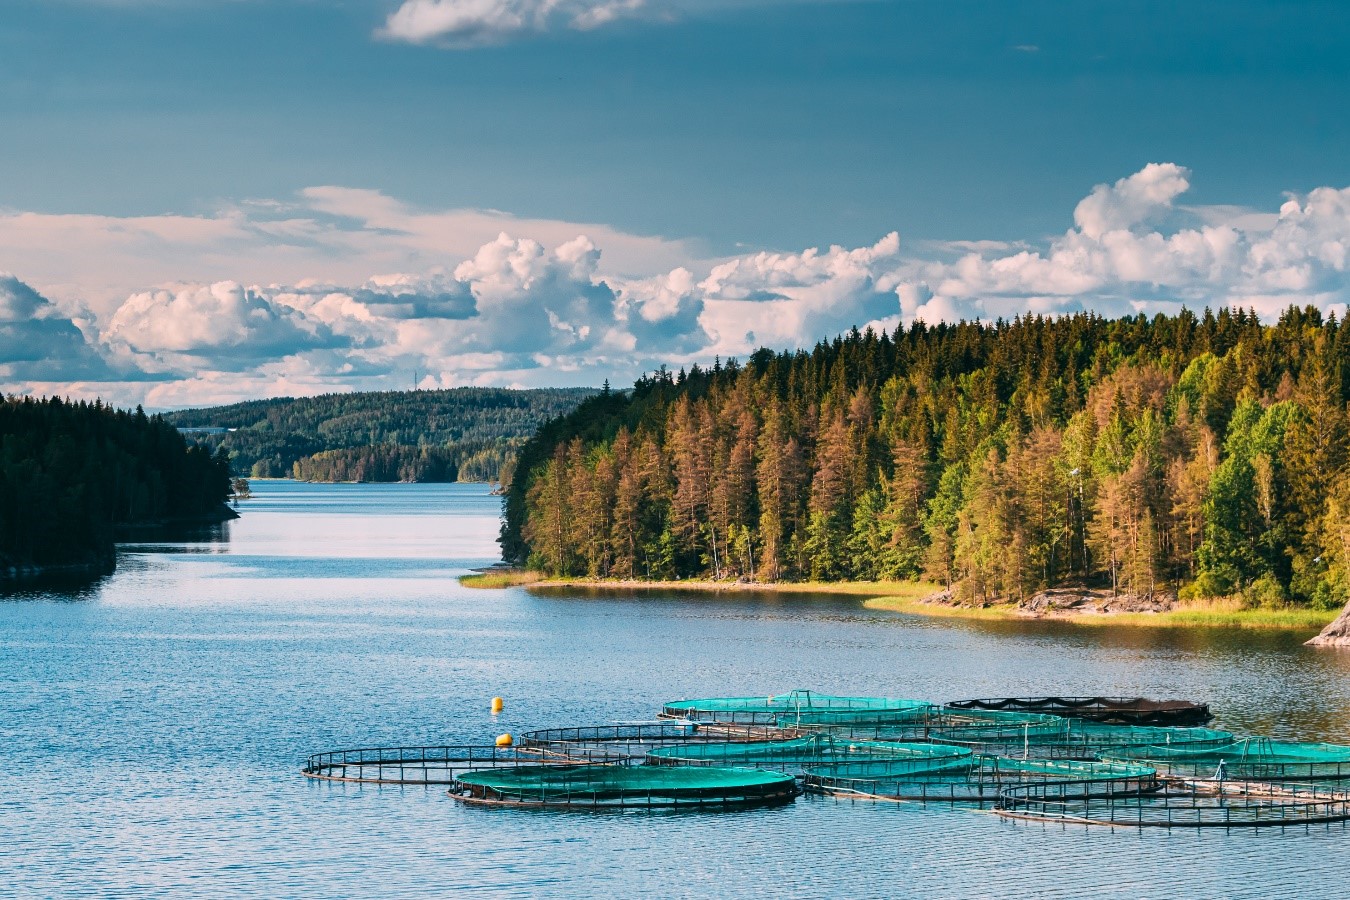 Technologies that allow you to have a sustainable aquaculture system